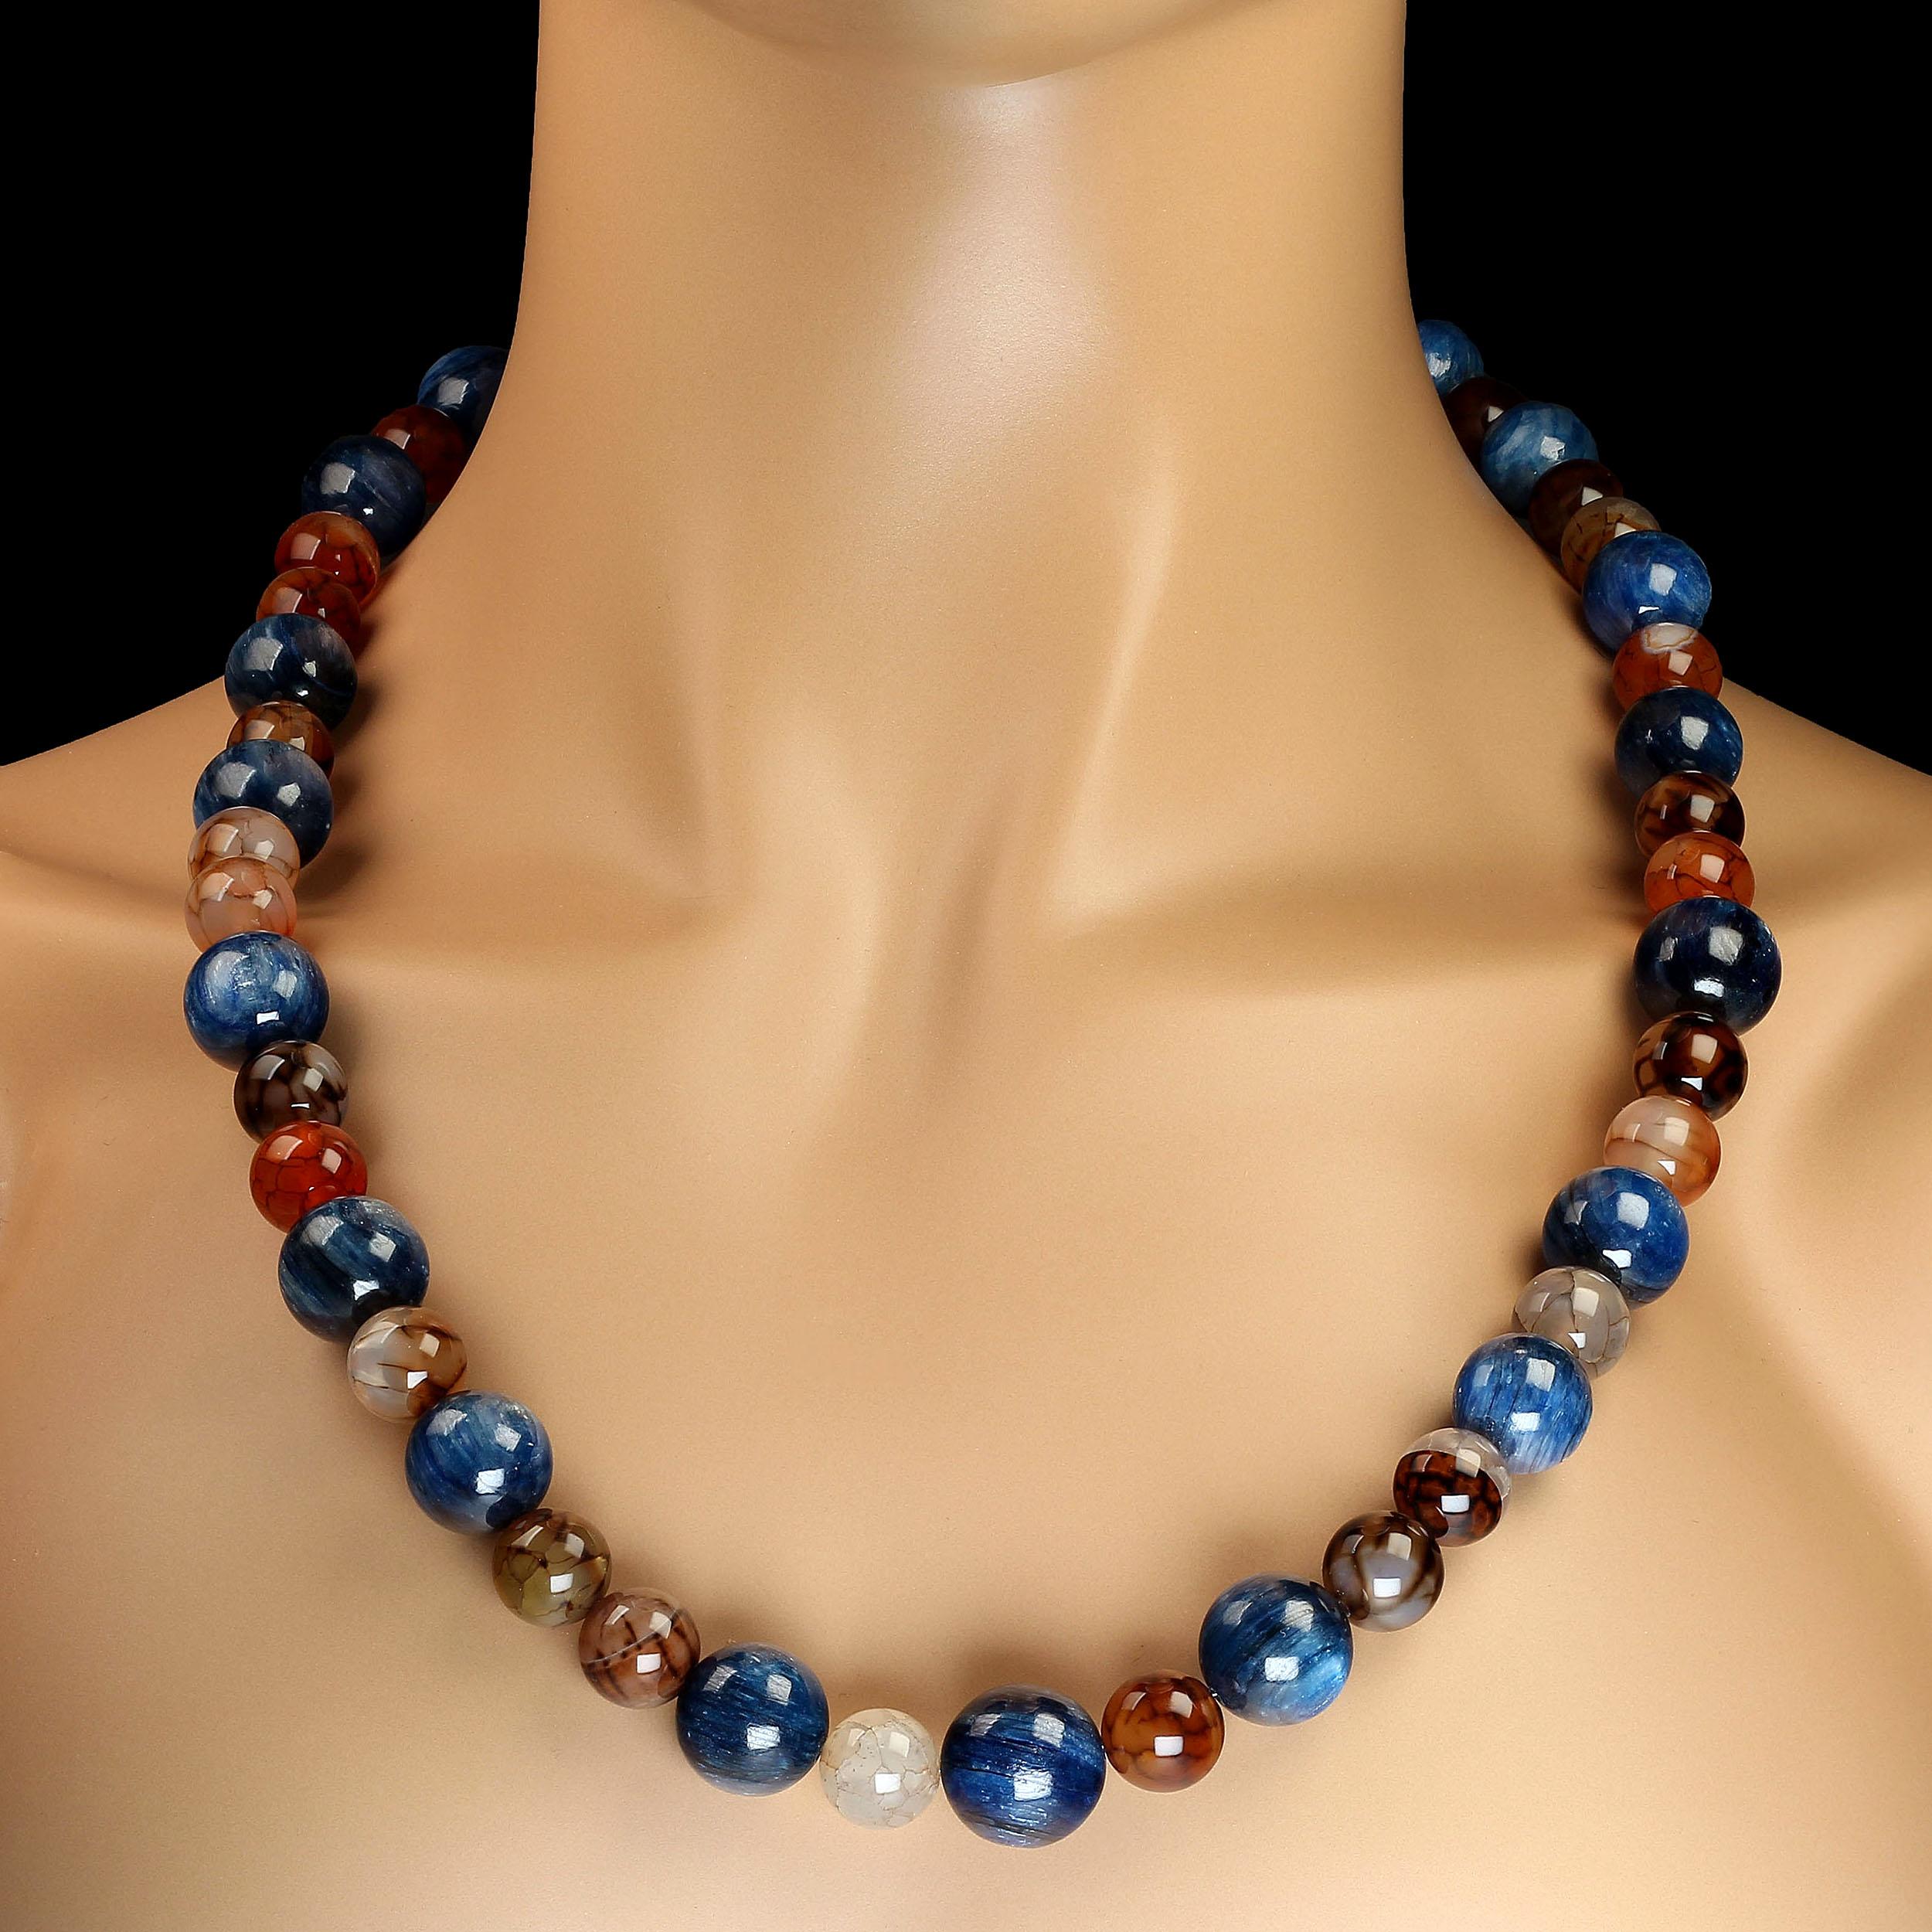 Fantastic necklace of chatoyant blue Kyanite and multi color Spiderweb Jasper.  This 25 inch  necklace is a delight to wear.  Blue and brown is a perfect combination especially in these highly polished gemstones. Wear this glowing necklace and